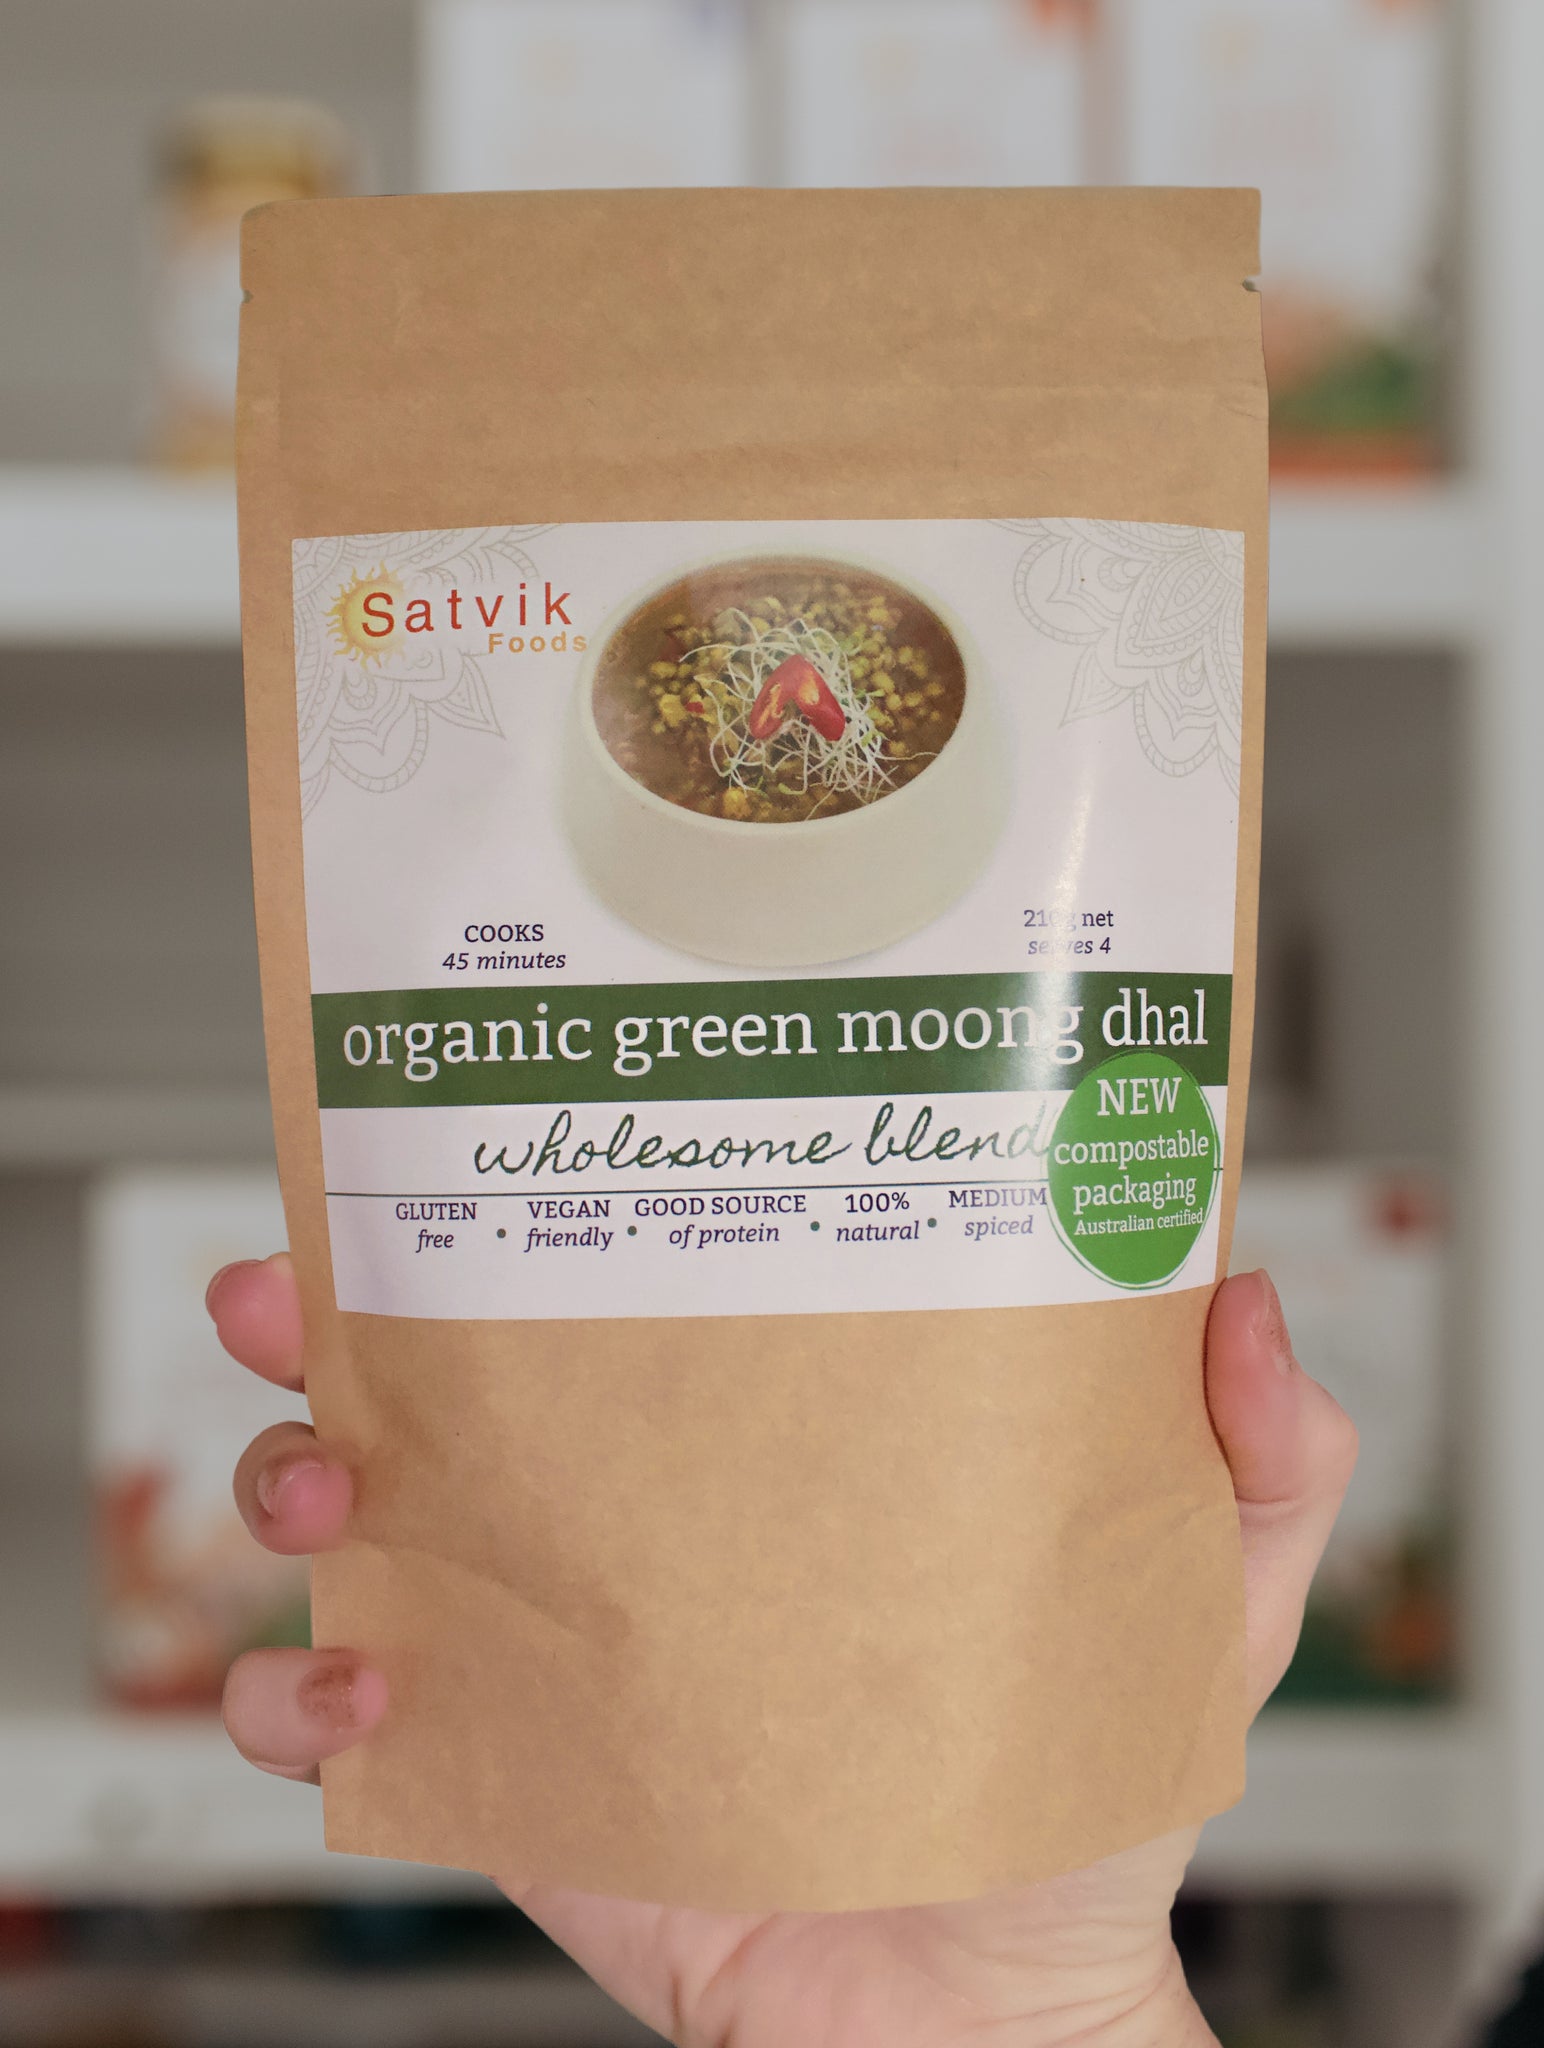 Satvik Foods Organic Green Moong Bean Dhal with our Supreme Blend (Has a Touch of Chilli) is a flavorful and nutritious meal option that is available for purchase online. The product is made with organic green moong beans and a blend of aromatic spices, including a touch of chili.